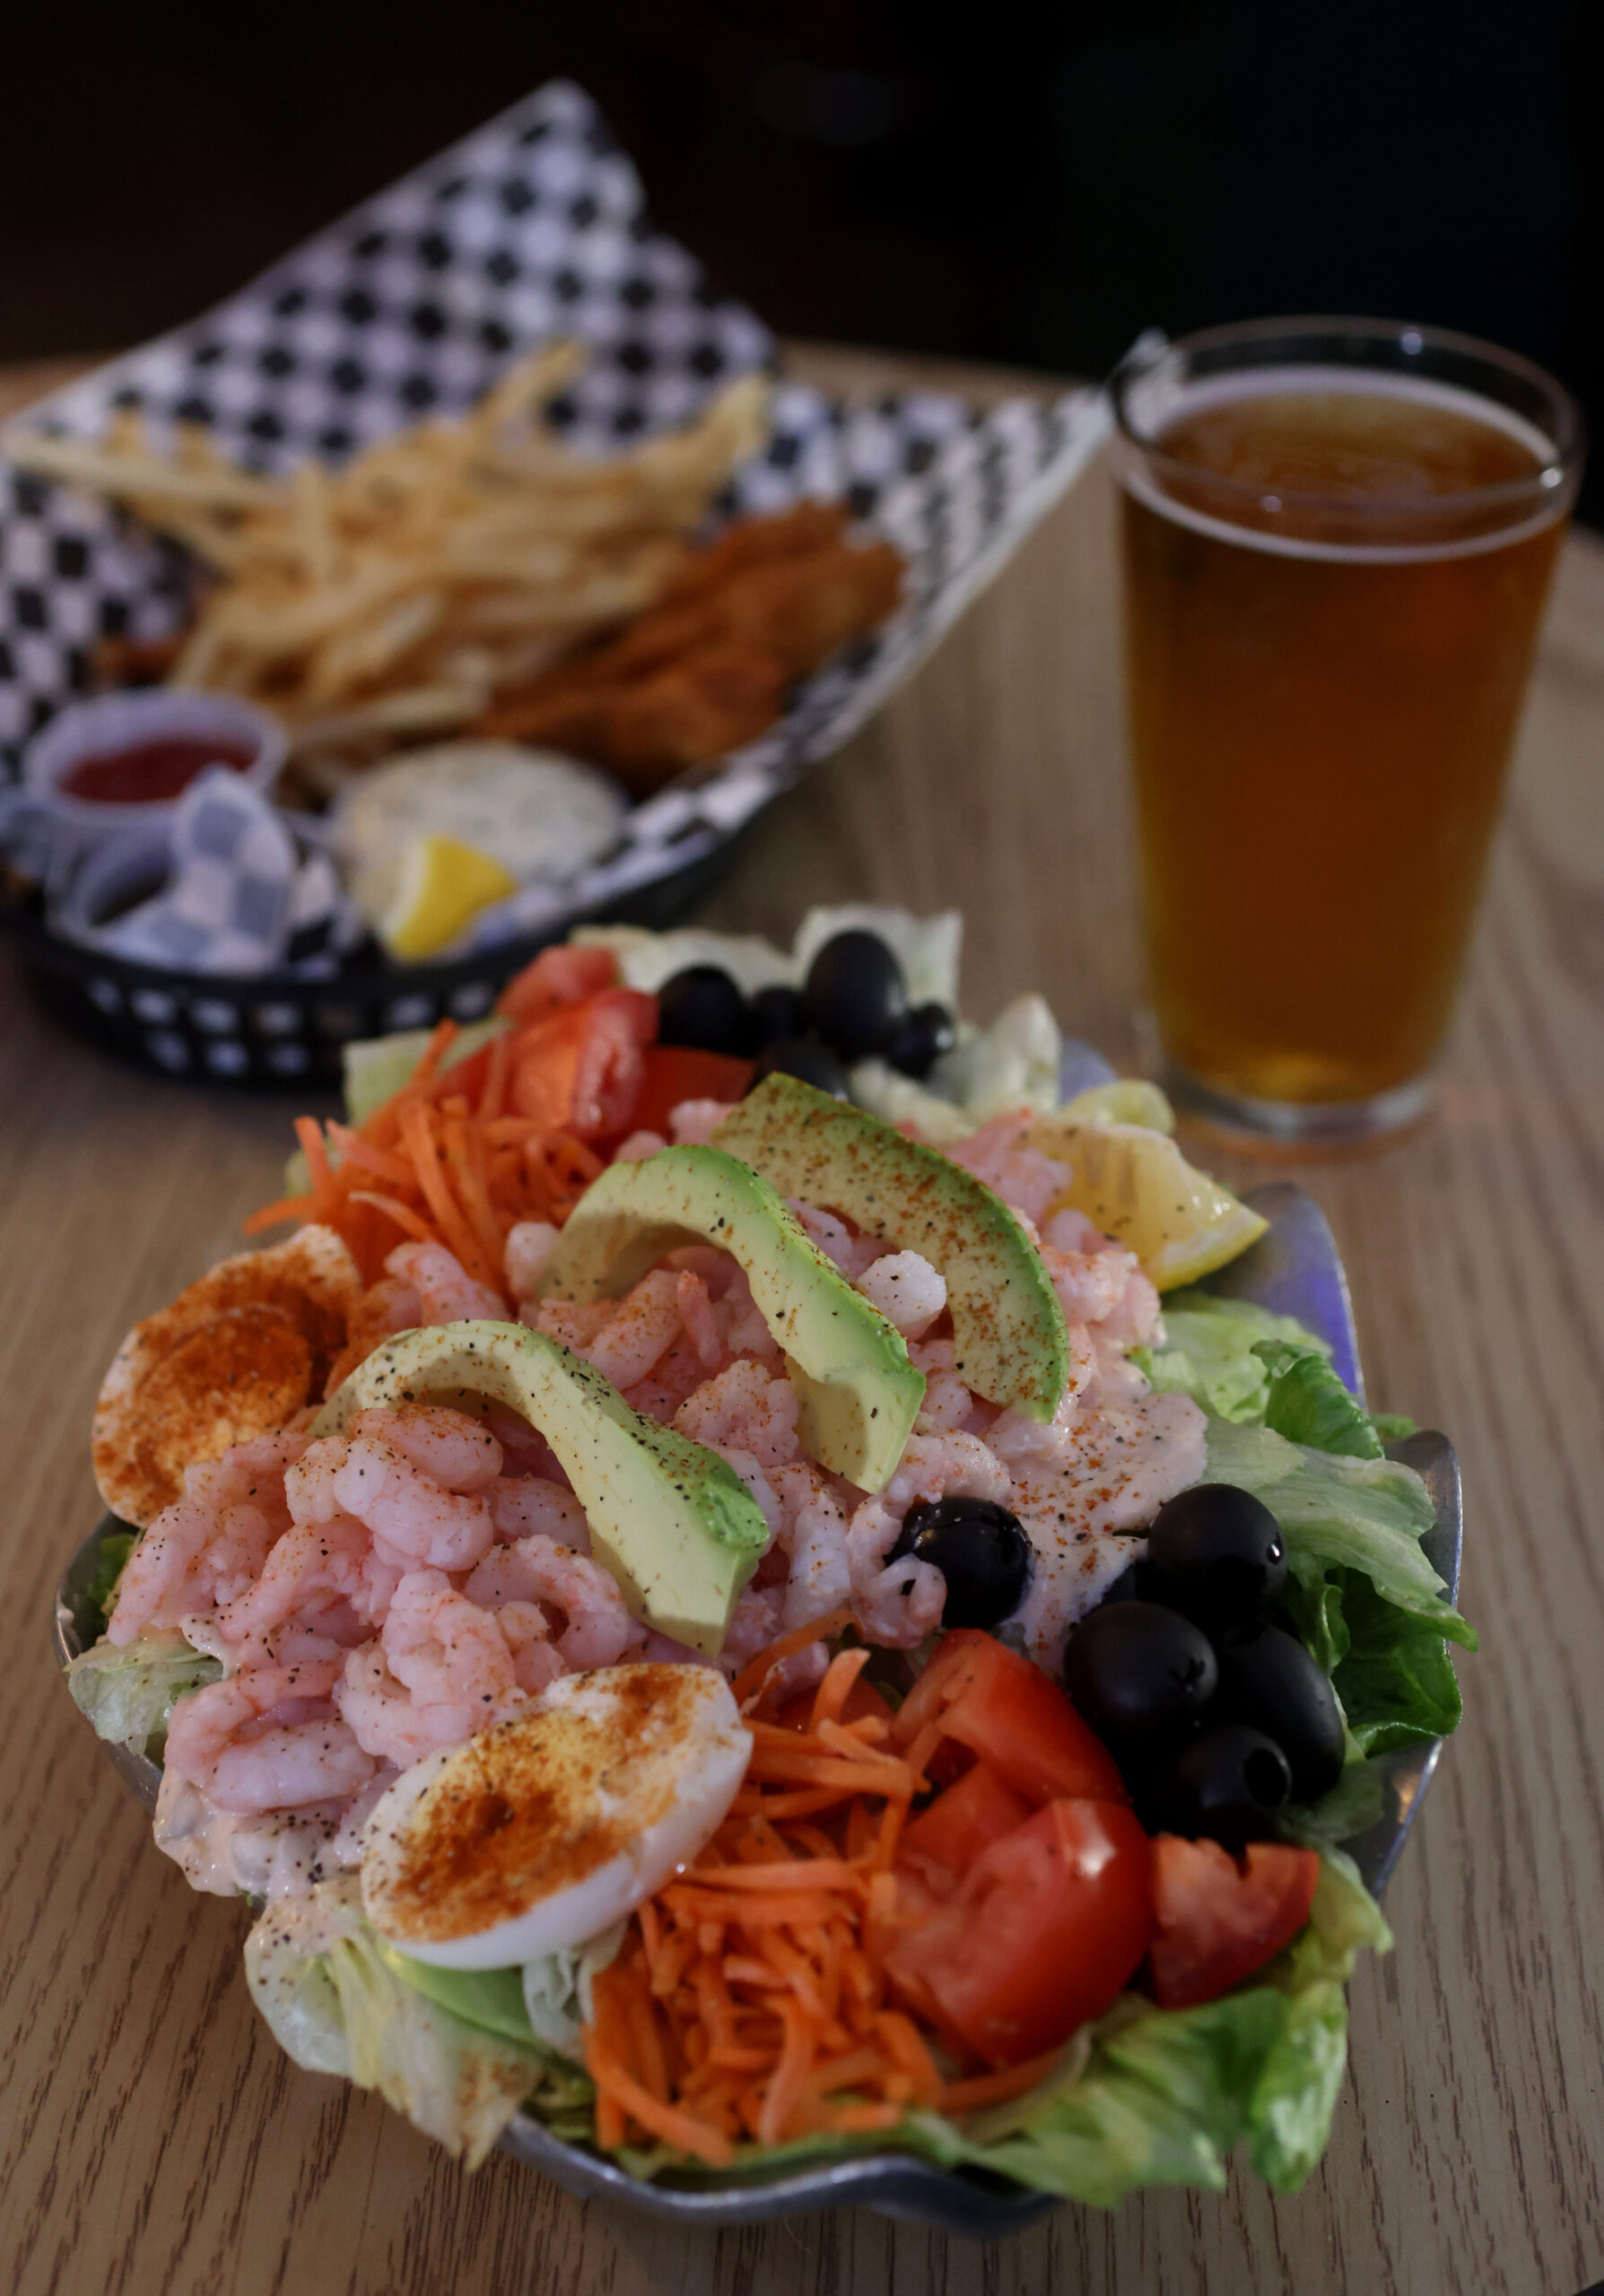 Shrimp Louie Salad and the Fish N' Chips at Steiner's Tavern in Sonoma, Calif., on Tuesday, December 21, 2021.(Beth Schlanker/The Press Democrat)